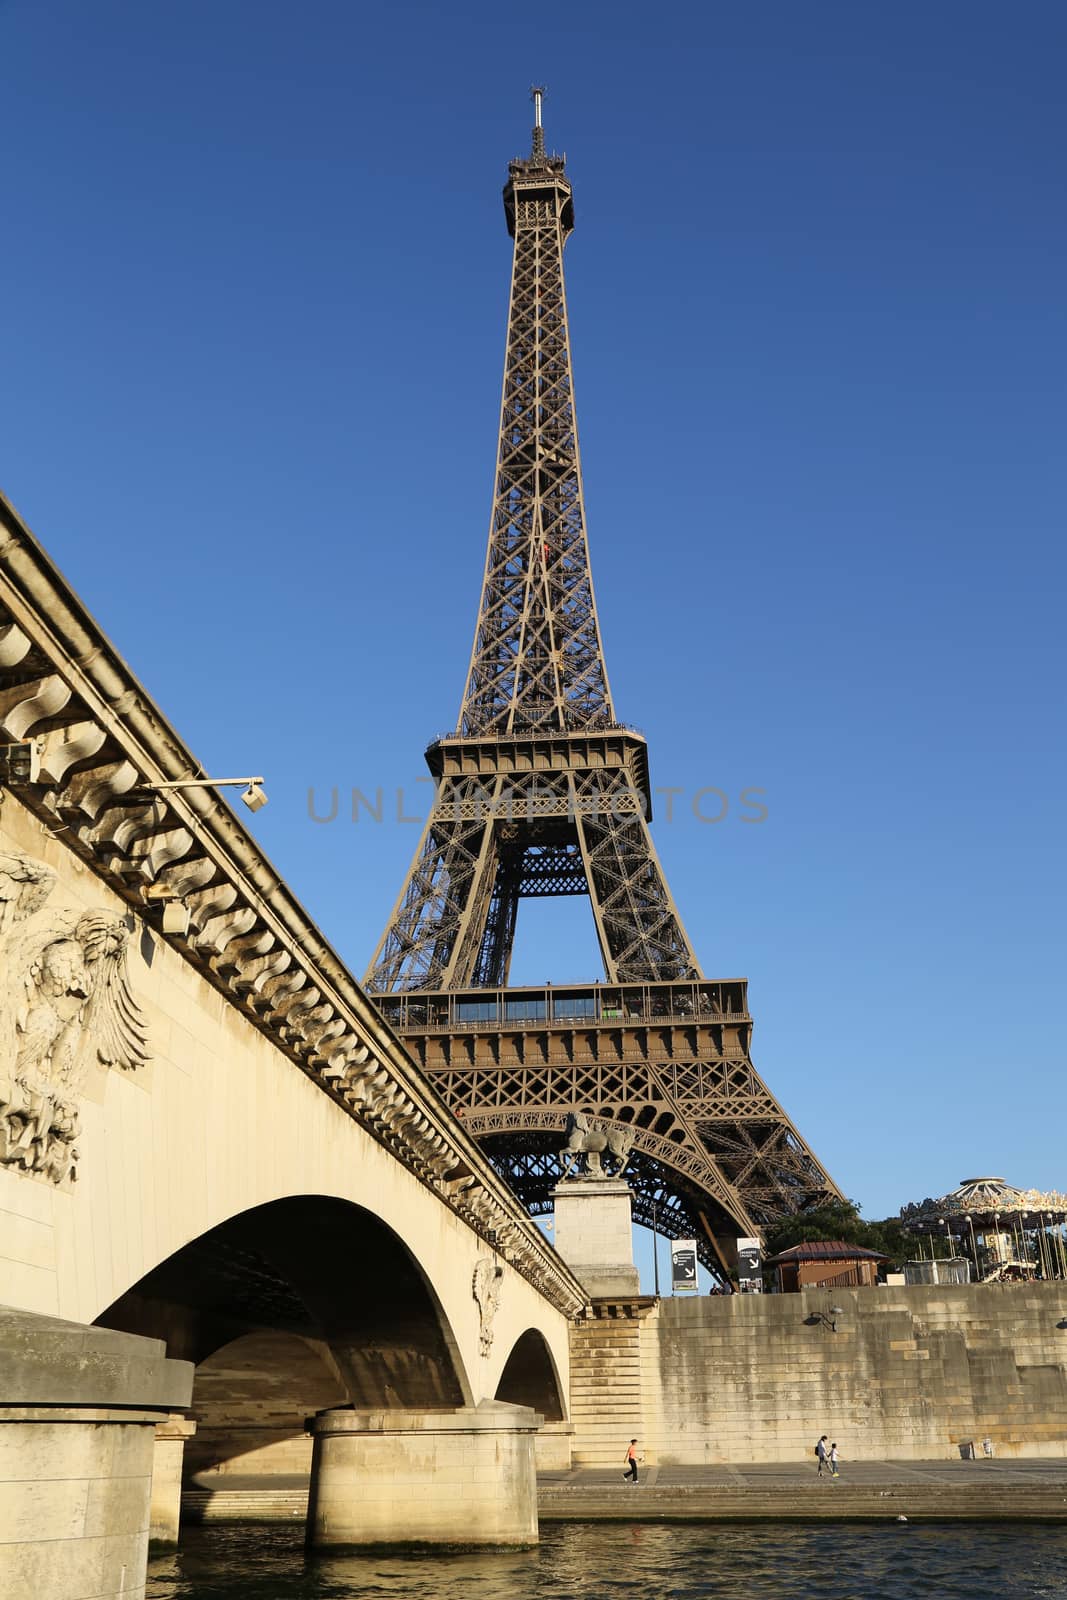 Eiffel Tower in Paris France seen from the Seine River